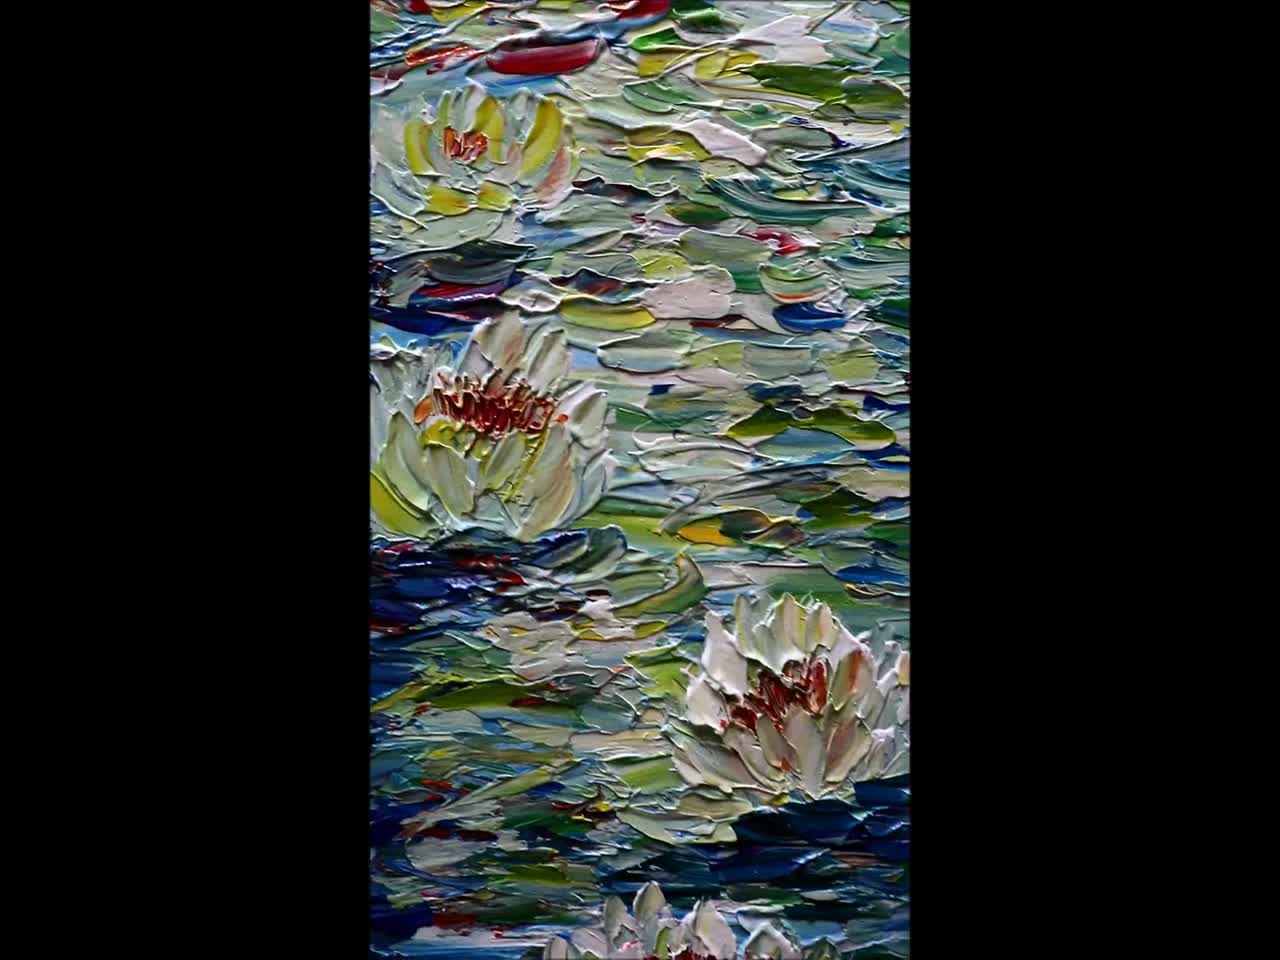 COLORFUL MIST Pollock Drip Art Abstract Huge Landscape Painting Extra Large  48x30, 48x36, 60x36 